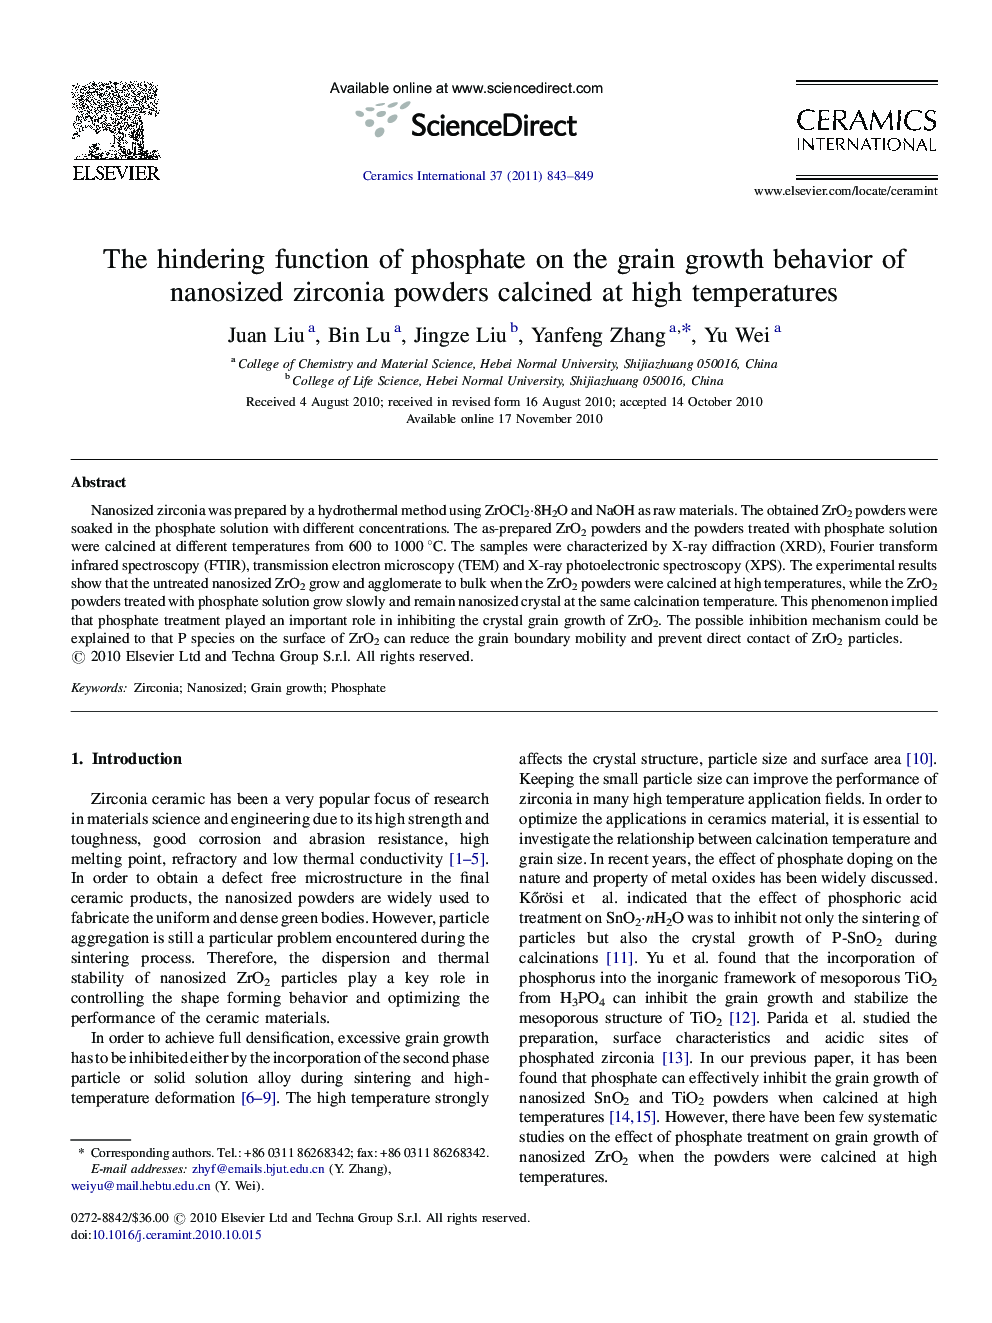 The hindering function of phosphate on the grain growth behavior of nanosized zirconia powders calcined at high temperatures